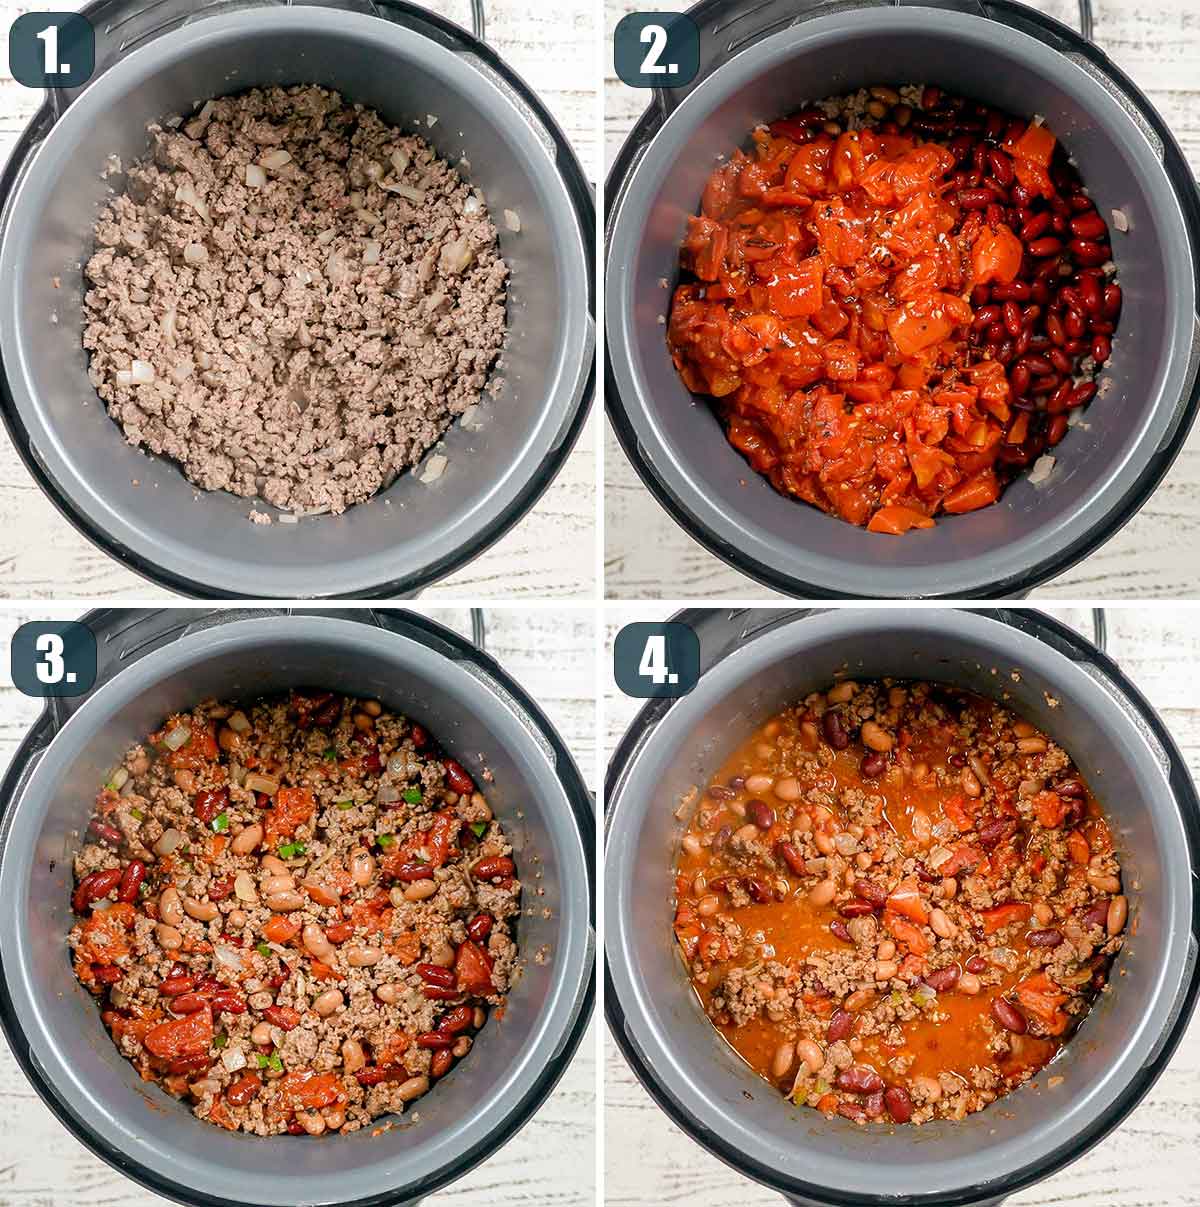 detailed process shots showing how to make chili in the instant pot.